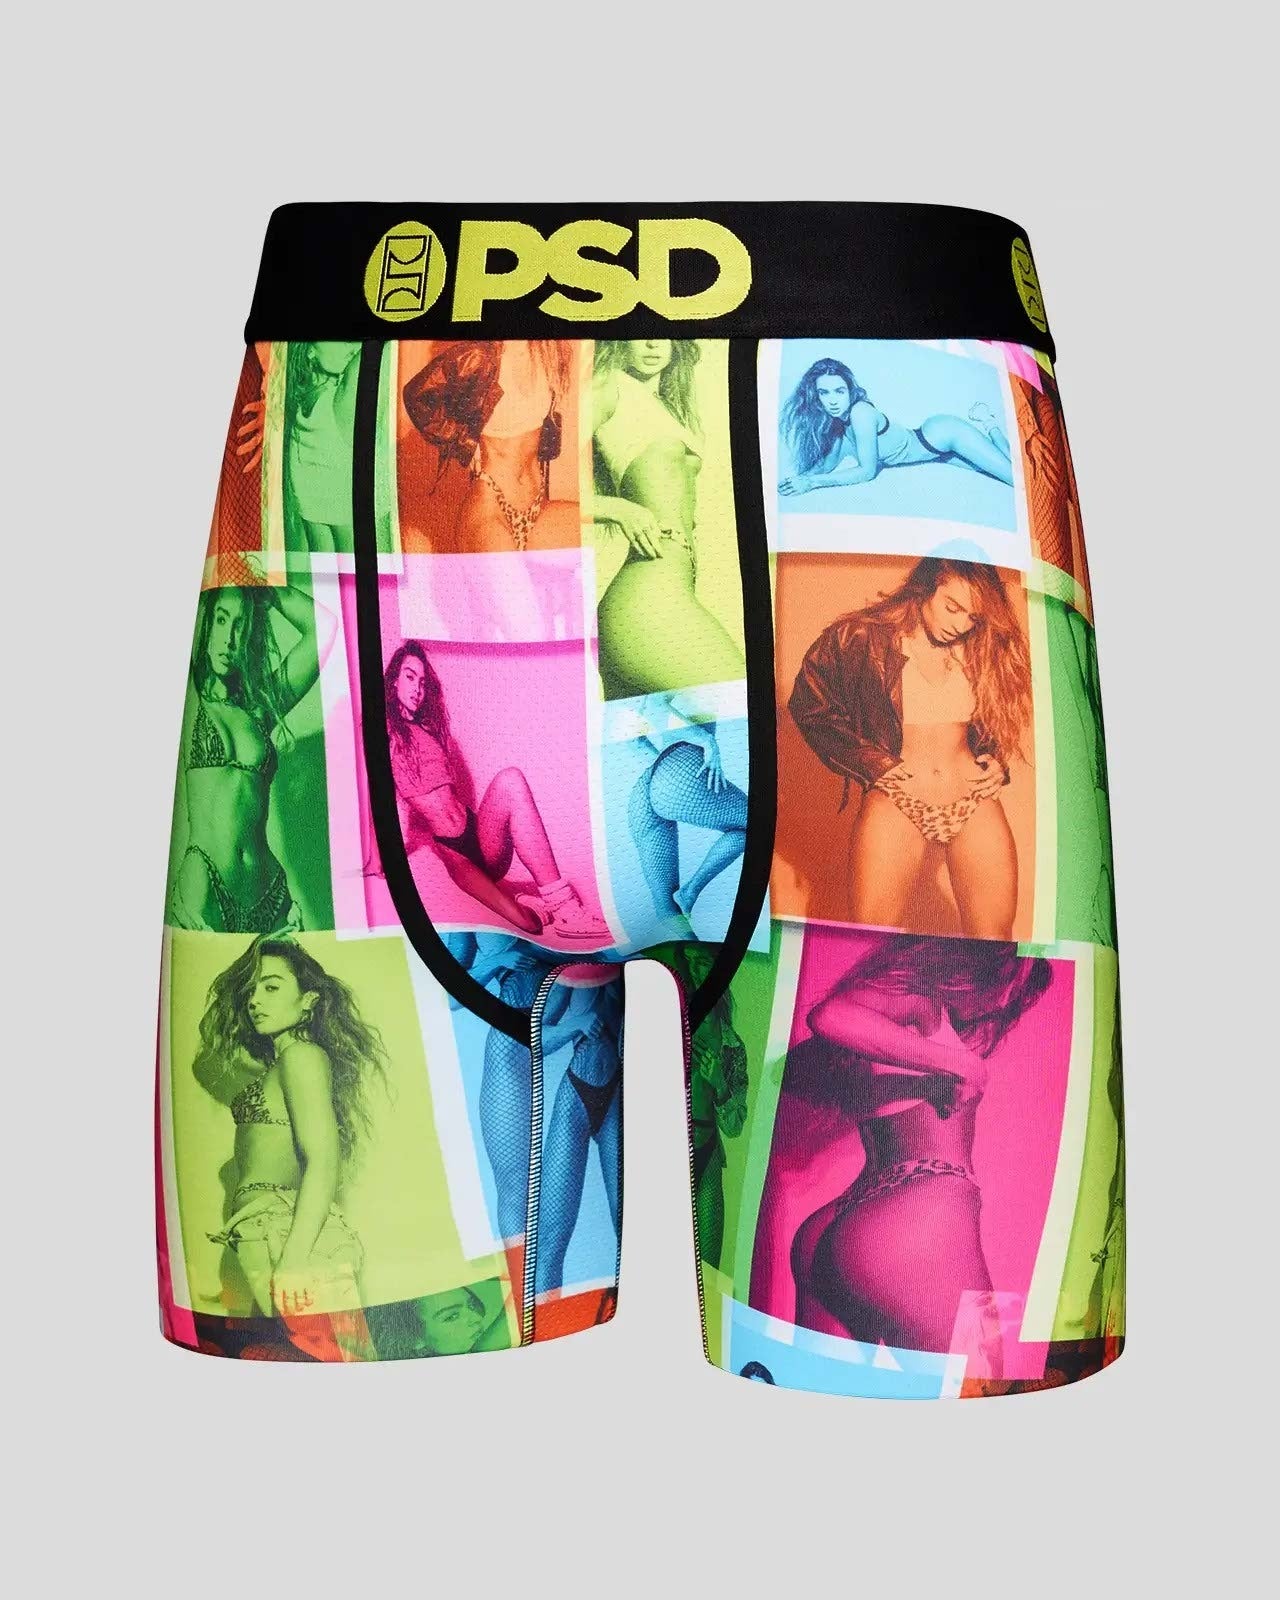 PSD Underwear on X: Black Friday Sale is HOT 🔥 Get @sommerray